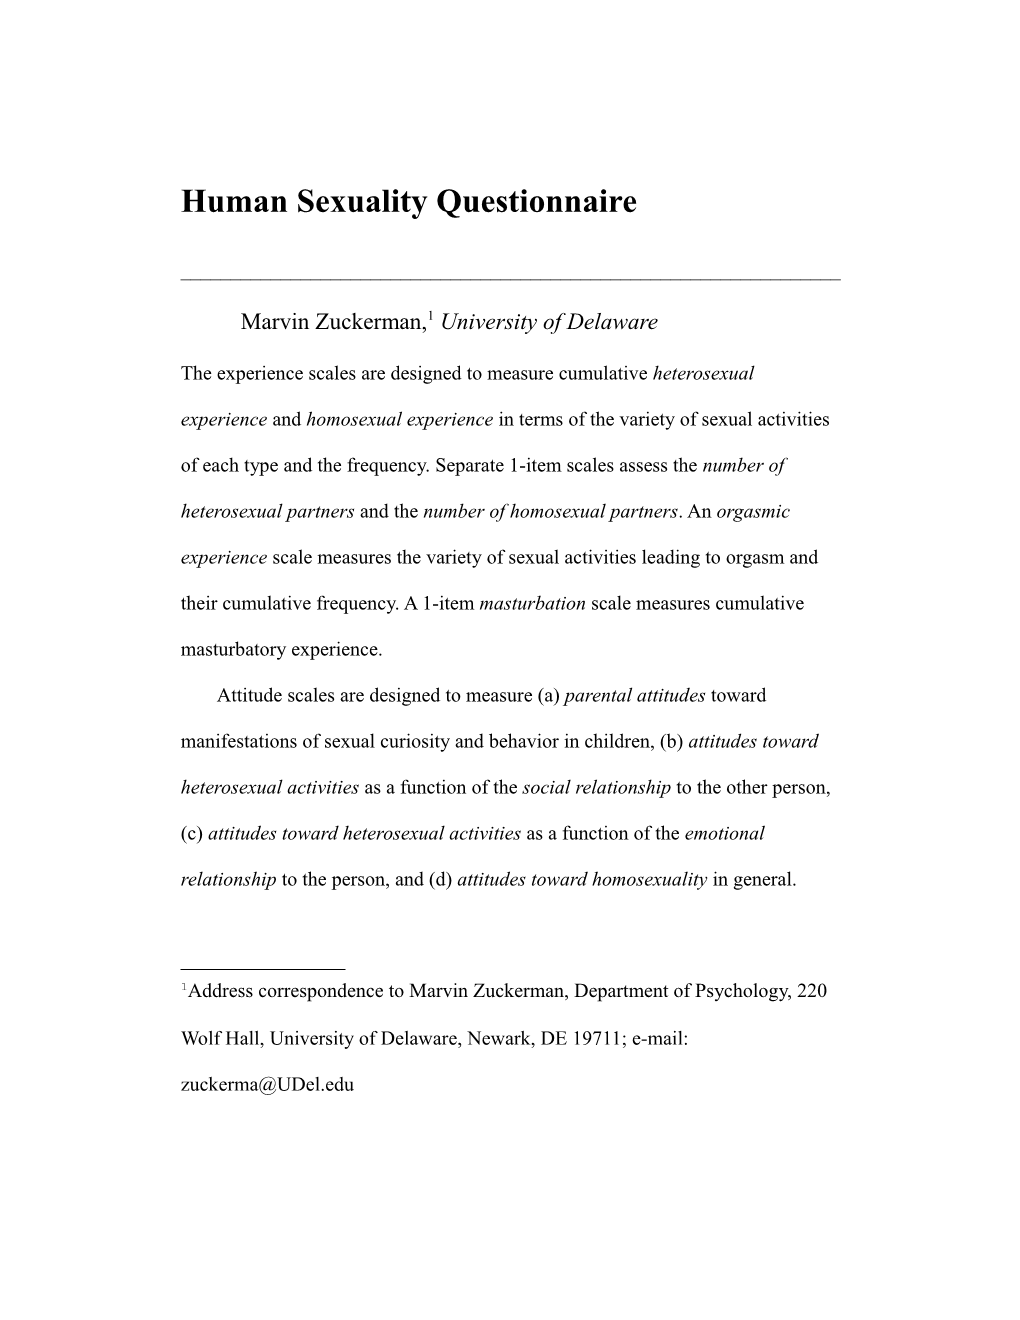 Human Sexuality Questionnaire